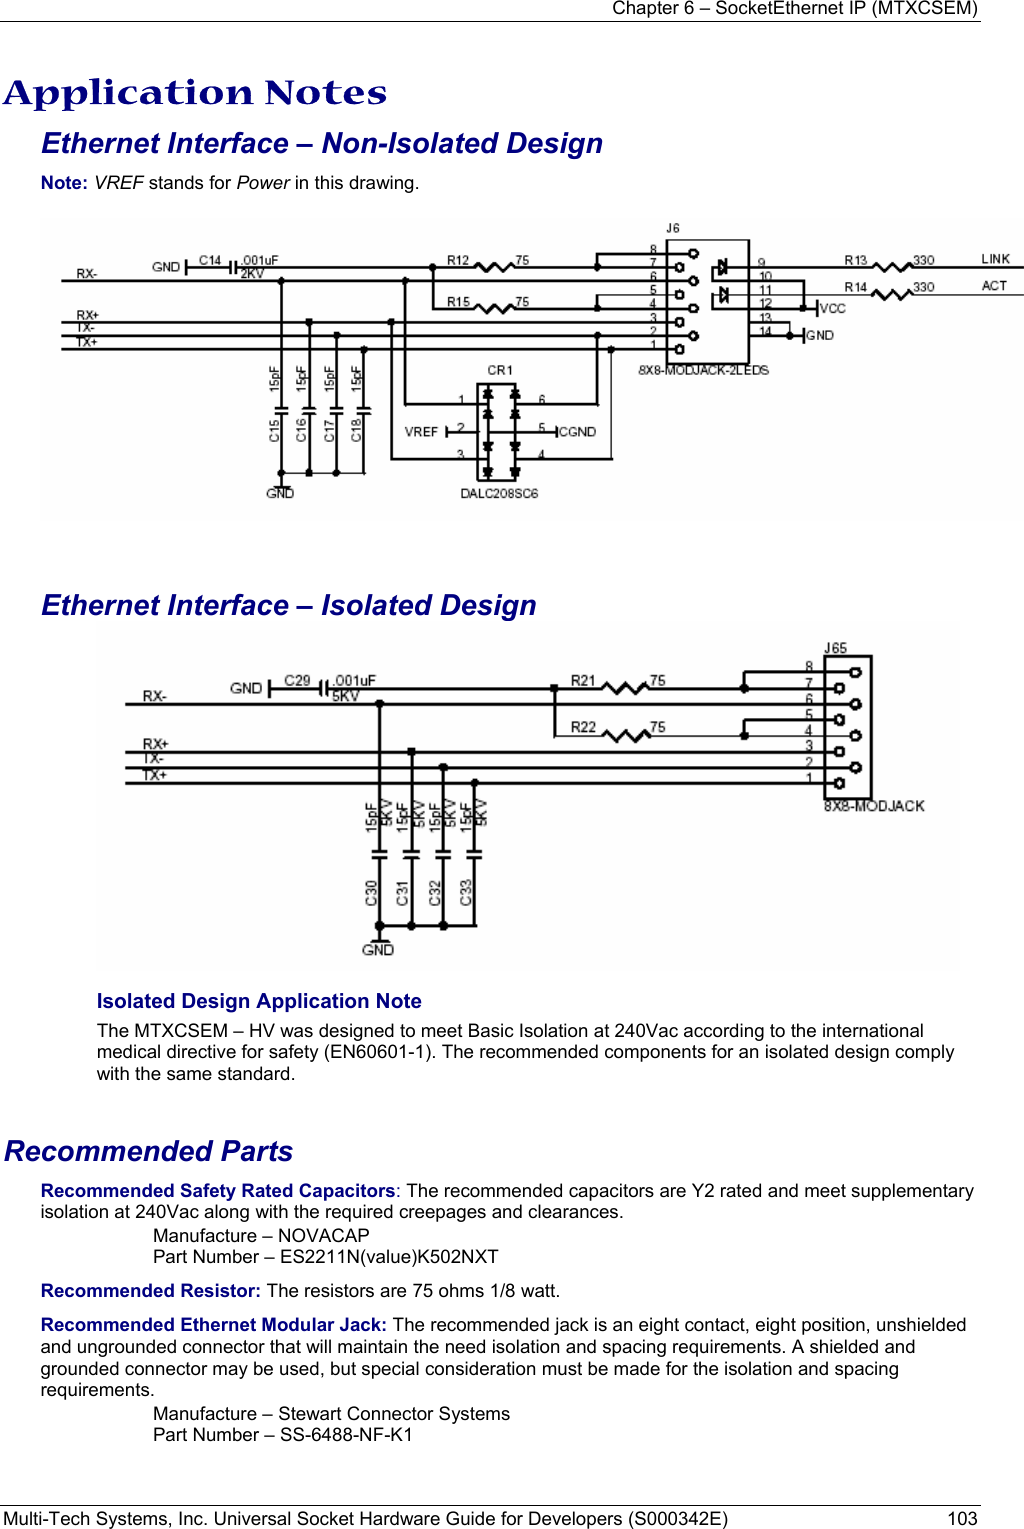 Chapter 6 – SocketEthernet IP (MTXCSEM)  Multi-Tech Systems, Inc. Universal Socket Hardware Guide for Developers (S000342E)  103  Application Notes Ethernet Interface – Non-Isolated Design Note: VREF stands for Power in this drawing.    Ethernet Interface – Isolated Design  Isolated Design Application Note The MTXCSEM – HV was designed to meet Basic Isolation at 240Vac according to the international medical directive for safety (EN60601-1). The recommended components for an isolated design comply with the same standard.    Recommended Parts Recommended Safety Rated Capacitors: The recommended capacitors are Y2 rated and meet supplementary isolation at 240Vac along with the required creepages and clearances. Manufacture – NOVACAP Part Number – ES2211N(value)K502NXT Recommended Resistor: The resistors are 75 ohms 1/8 watt. Recommended Ethernet Modular Jack: The recommended jack is an eight contact, eight position, unshielded and ungrounded connector that will maintain the need isolation and spacing requirements. A shielded and grounded connector may be used, but special consideration must be made for the isolation and spacing requirements.  Manufacture – Stewart Connector Systems Part Number – SS-6488-NF-K1    